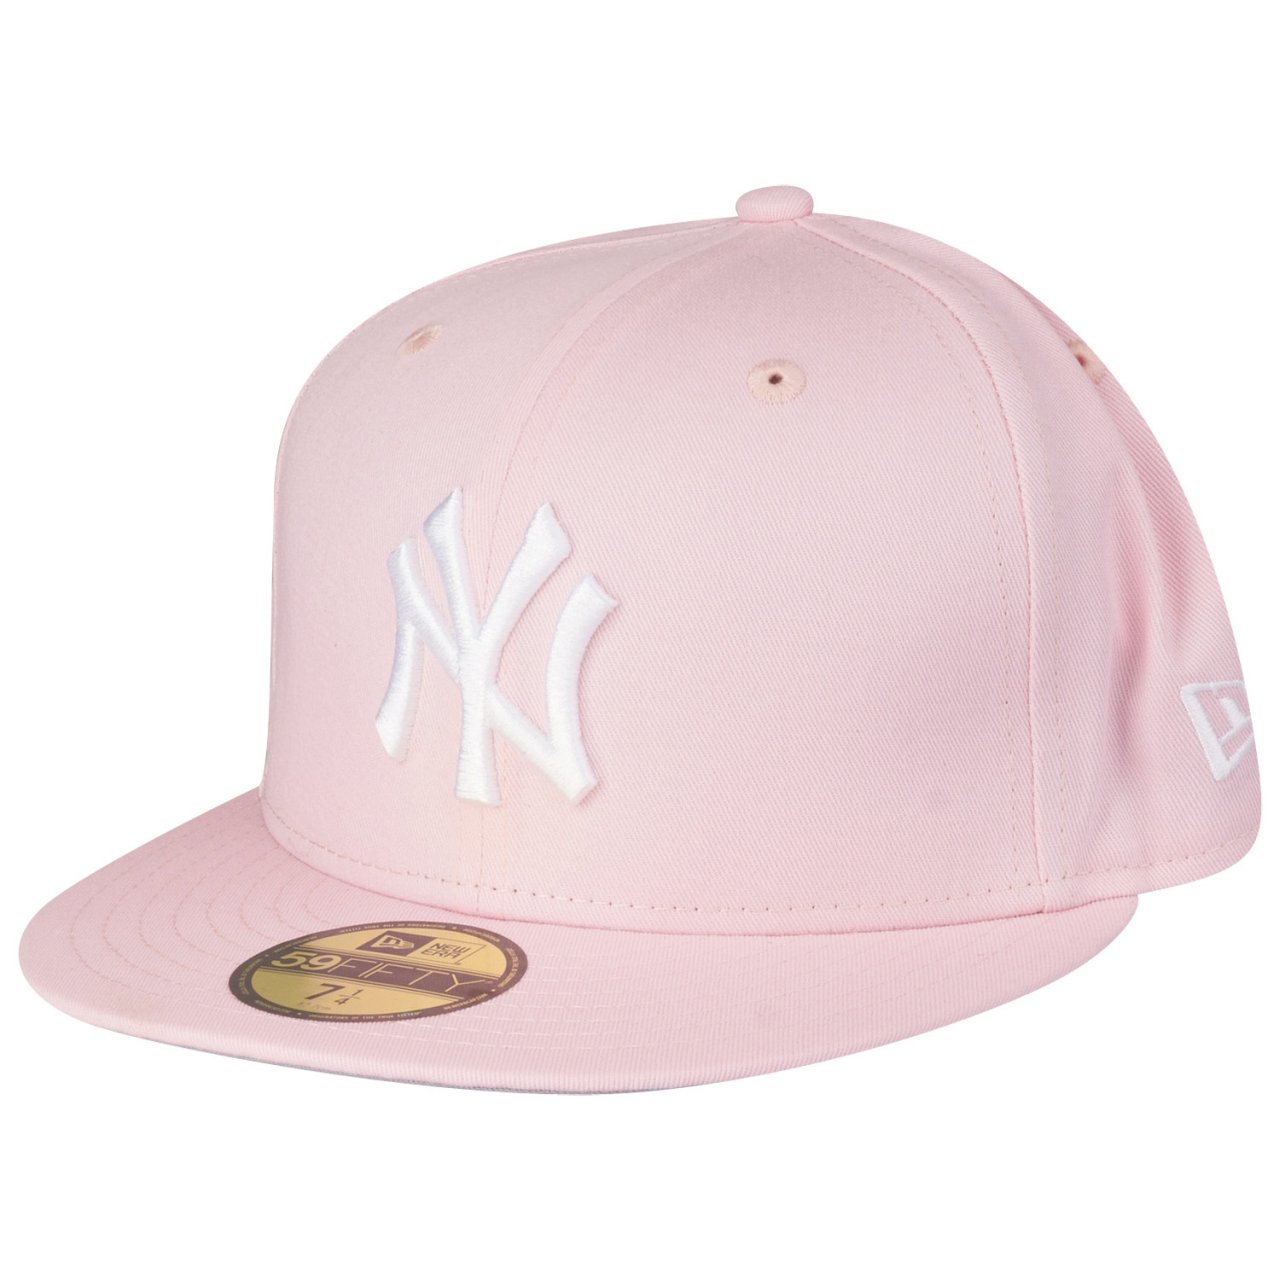 New Era 59Fifty Fitted Cap - MLB New York Yankees pink | Fitted | Caps ...